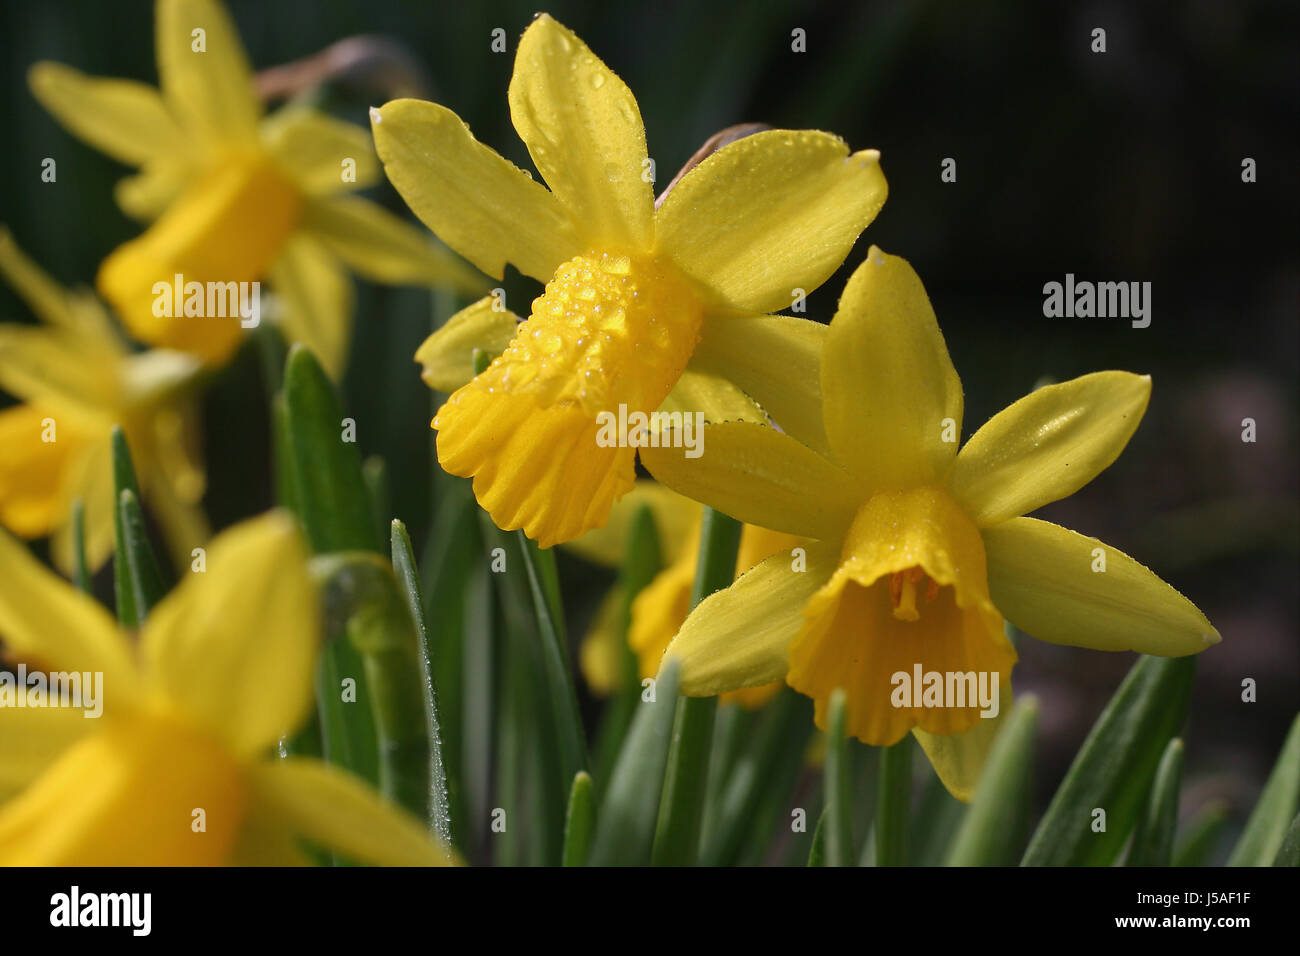 flower flowers plant blossoms easter dew dewdrop bleed daffodils daffodil Stock Photo